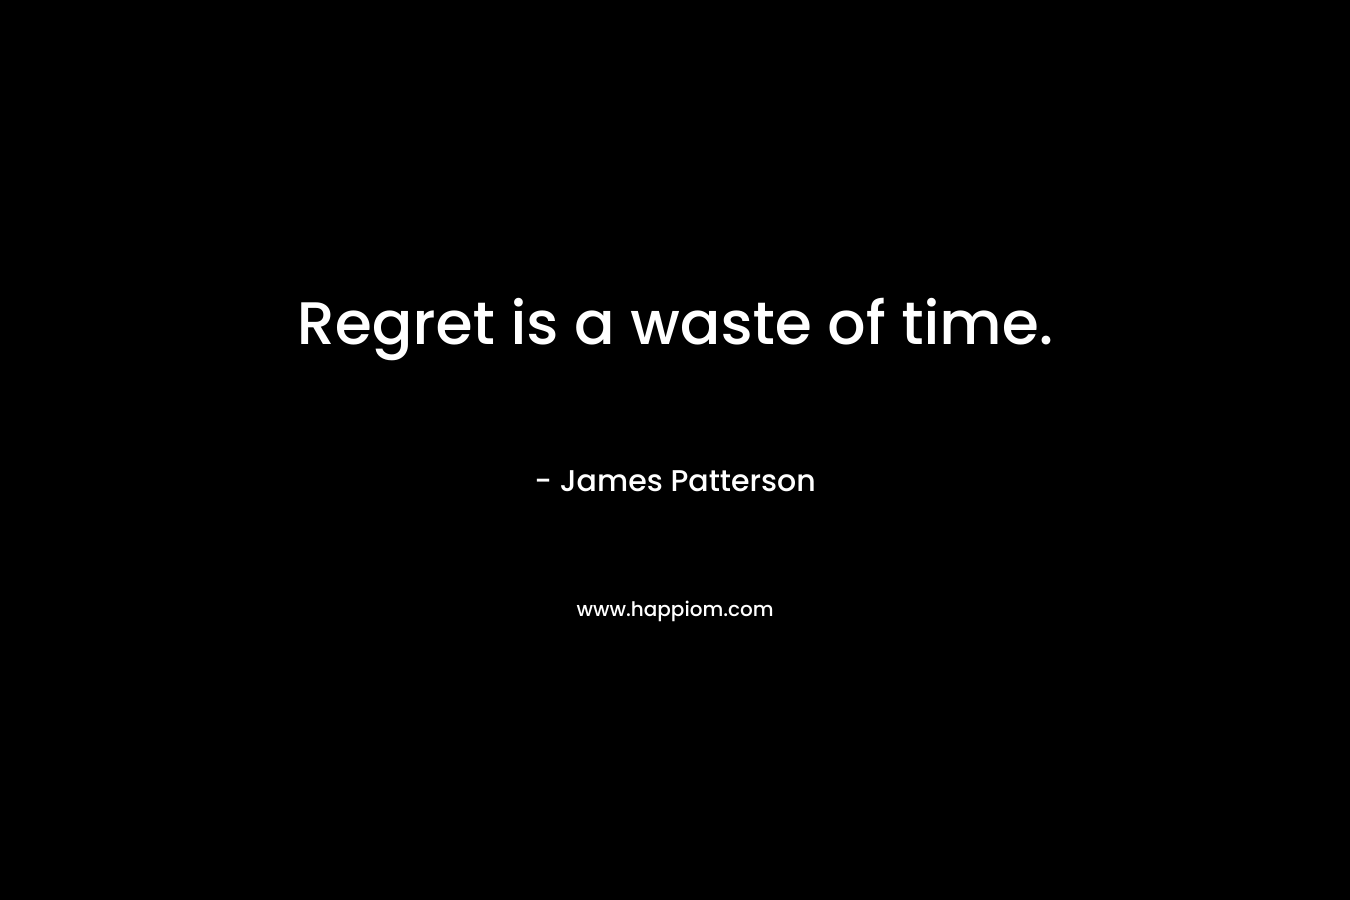 Regret is a waste of time.